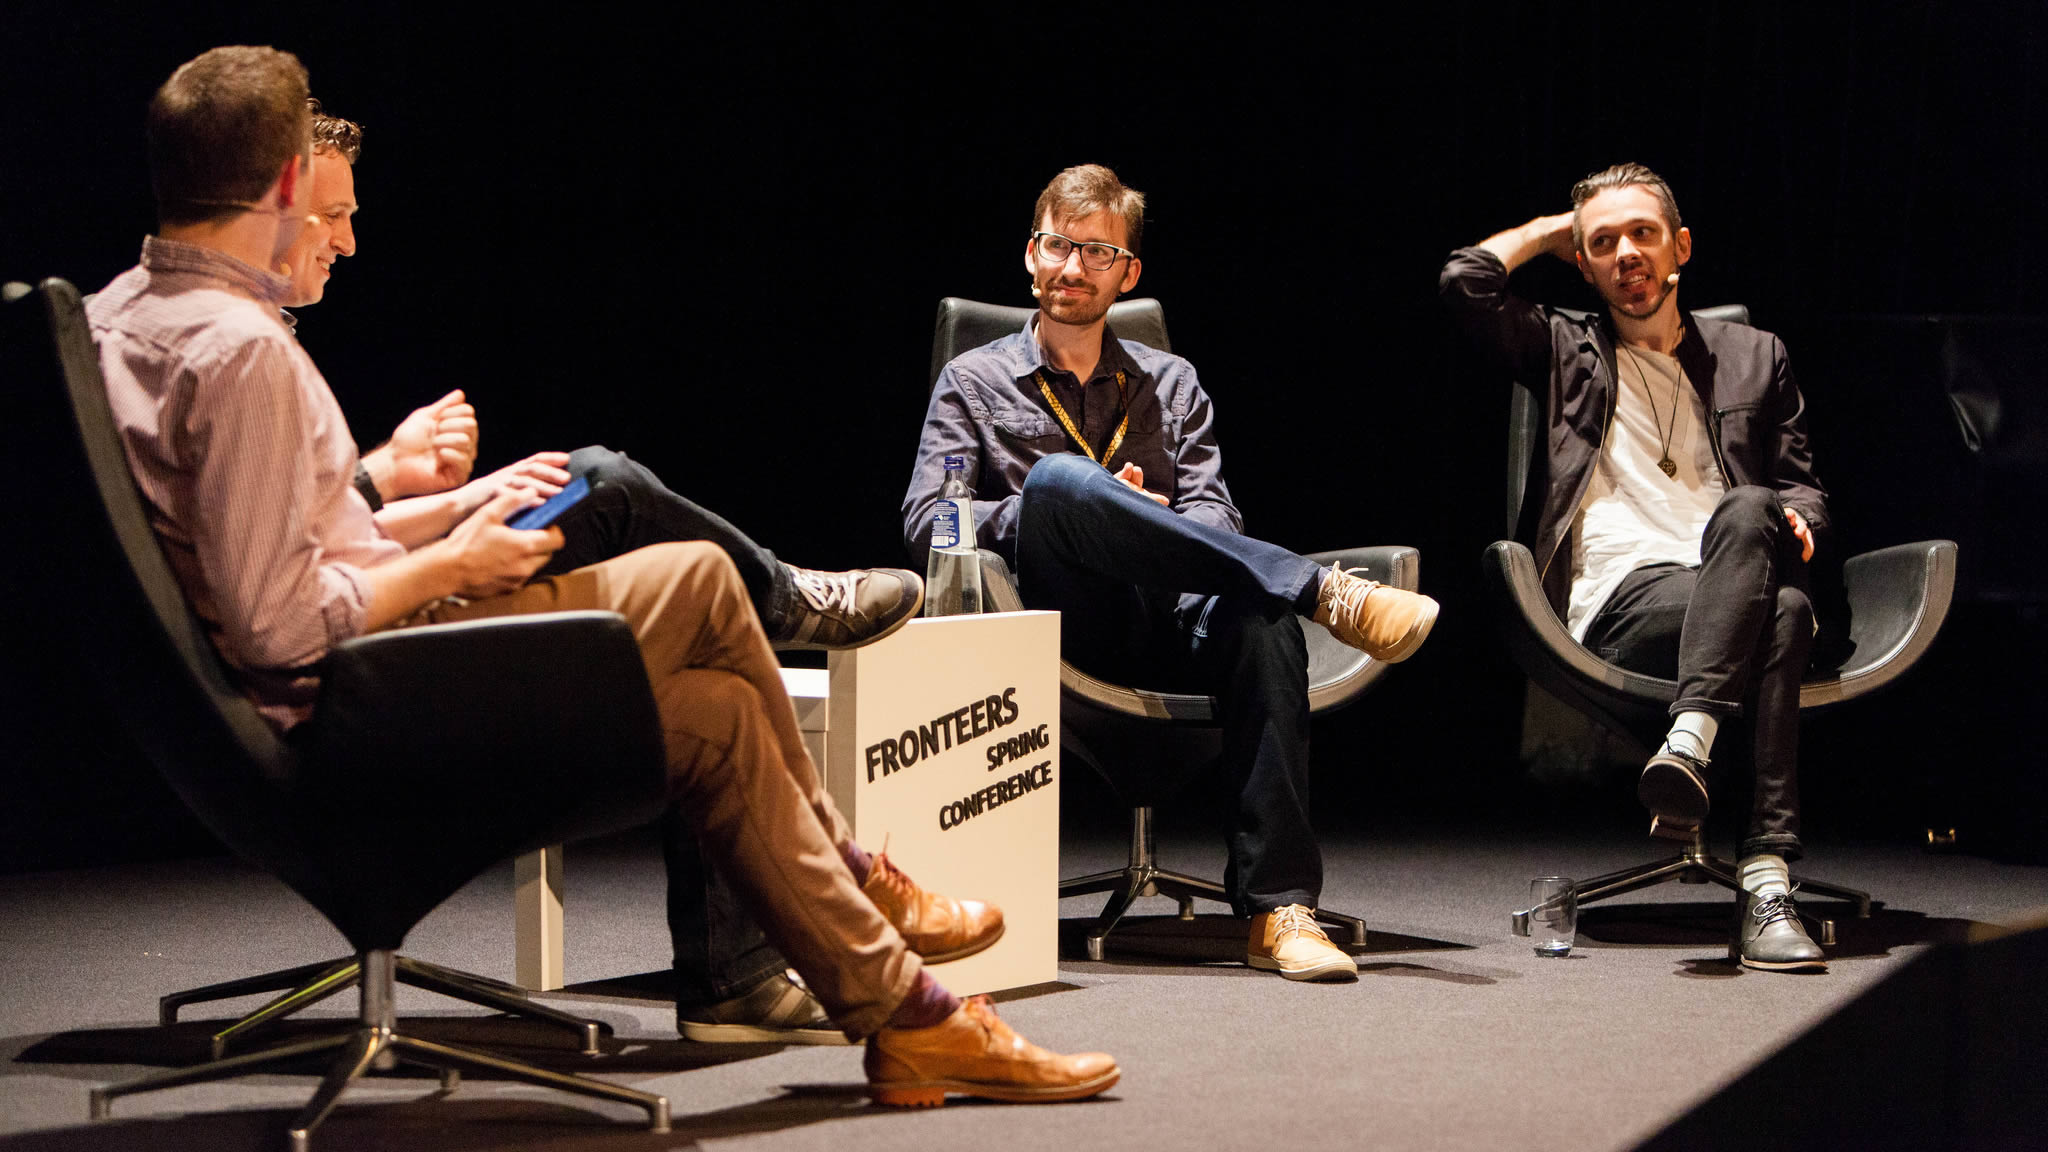 Panel discussion about Visual Performance - Hawksworth, Ahlin, Bakaus, Stein. Photo by Peter Peerdeman